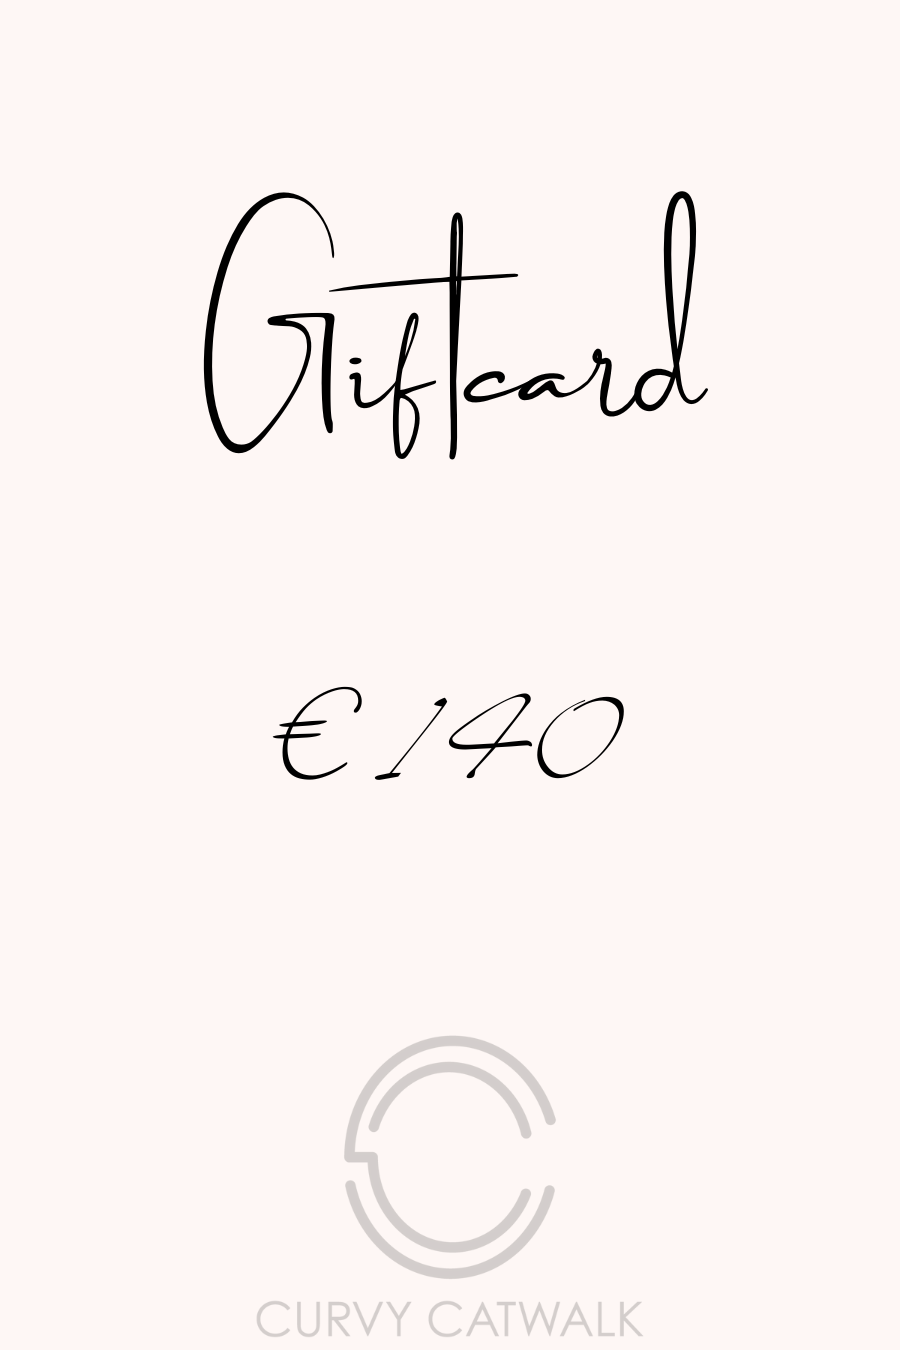 Giftcard €140